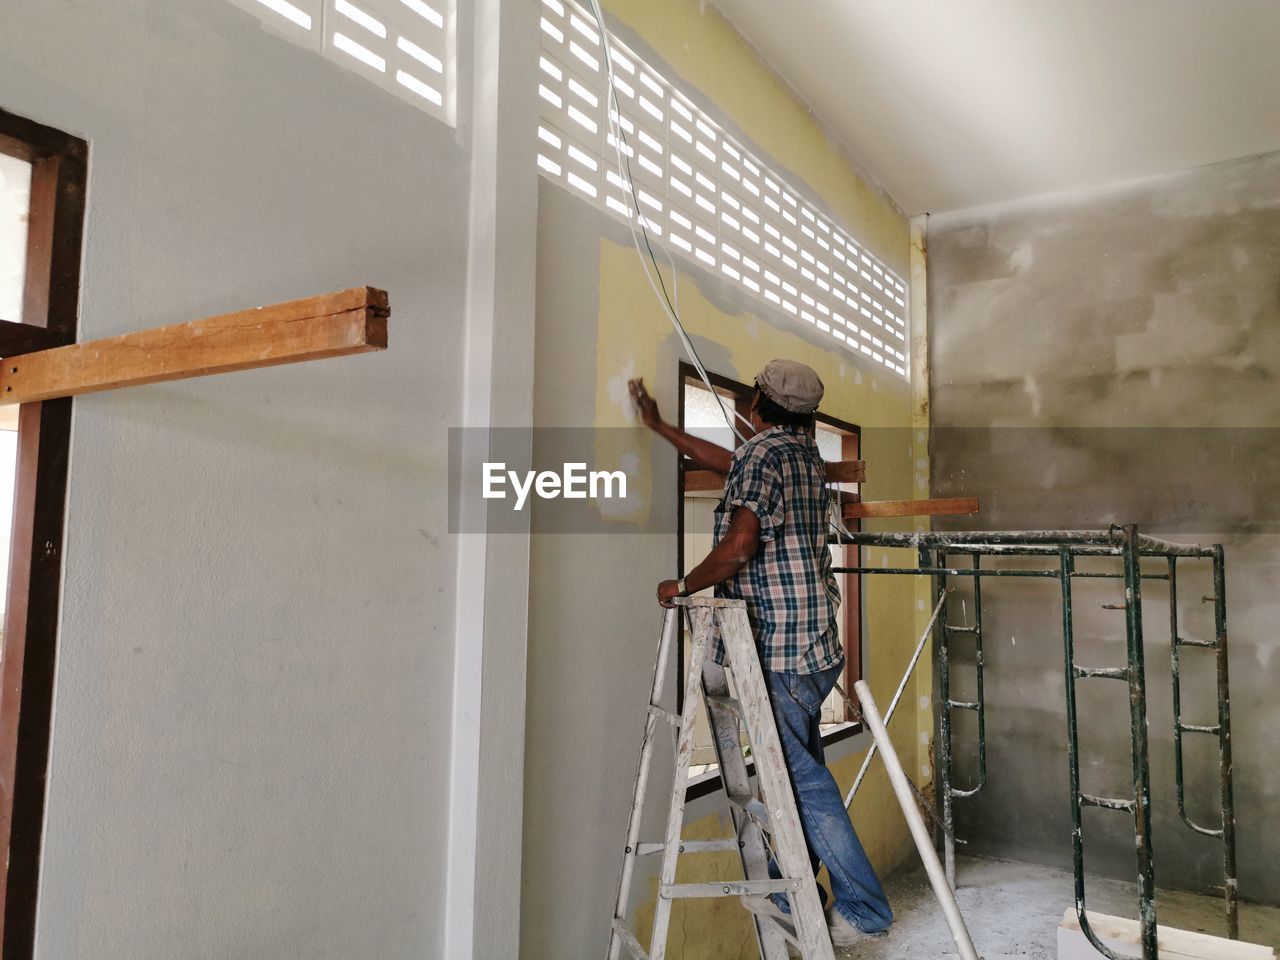 Man working on wall